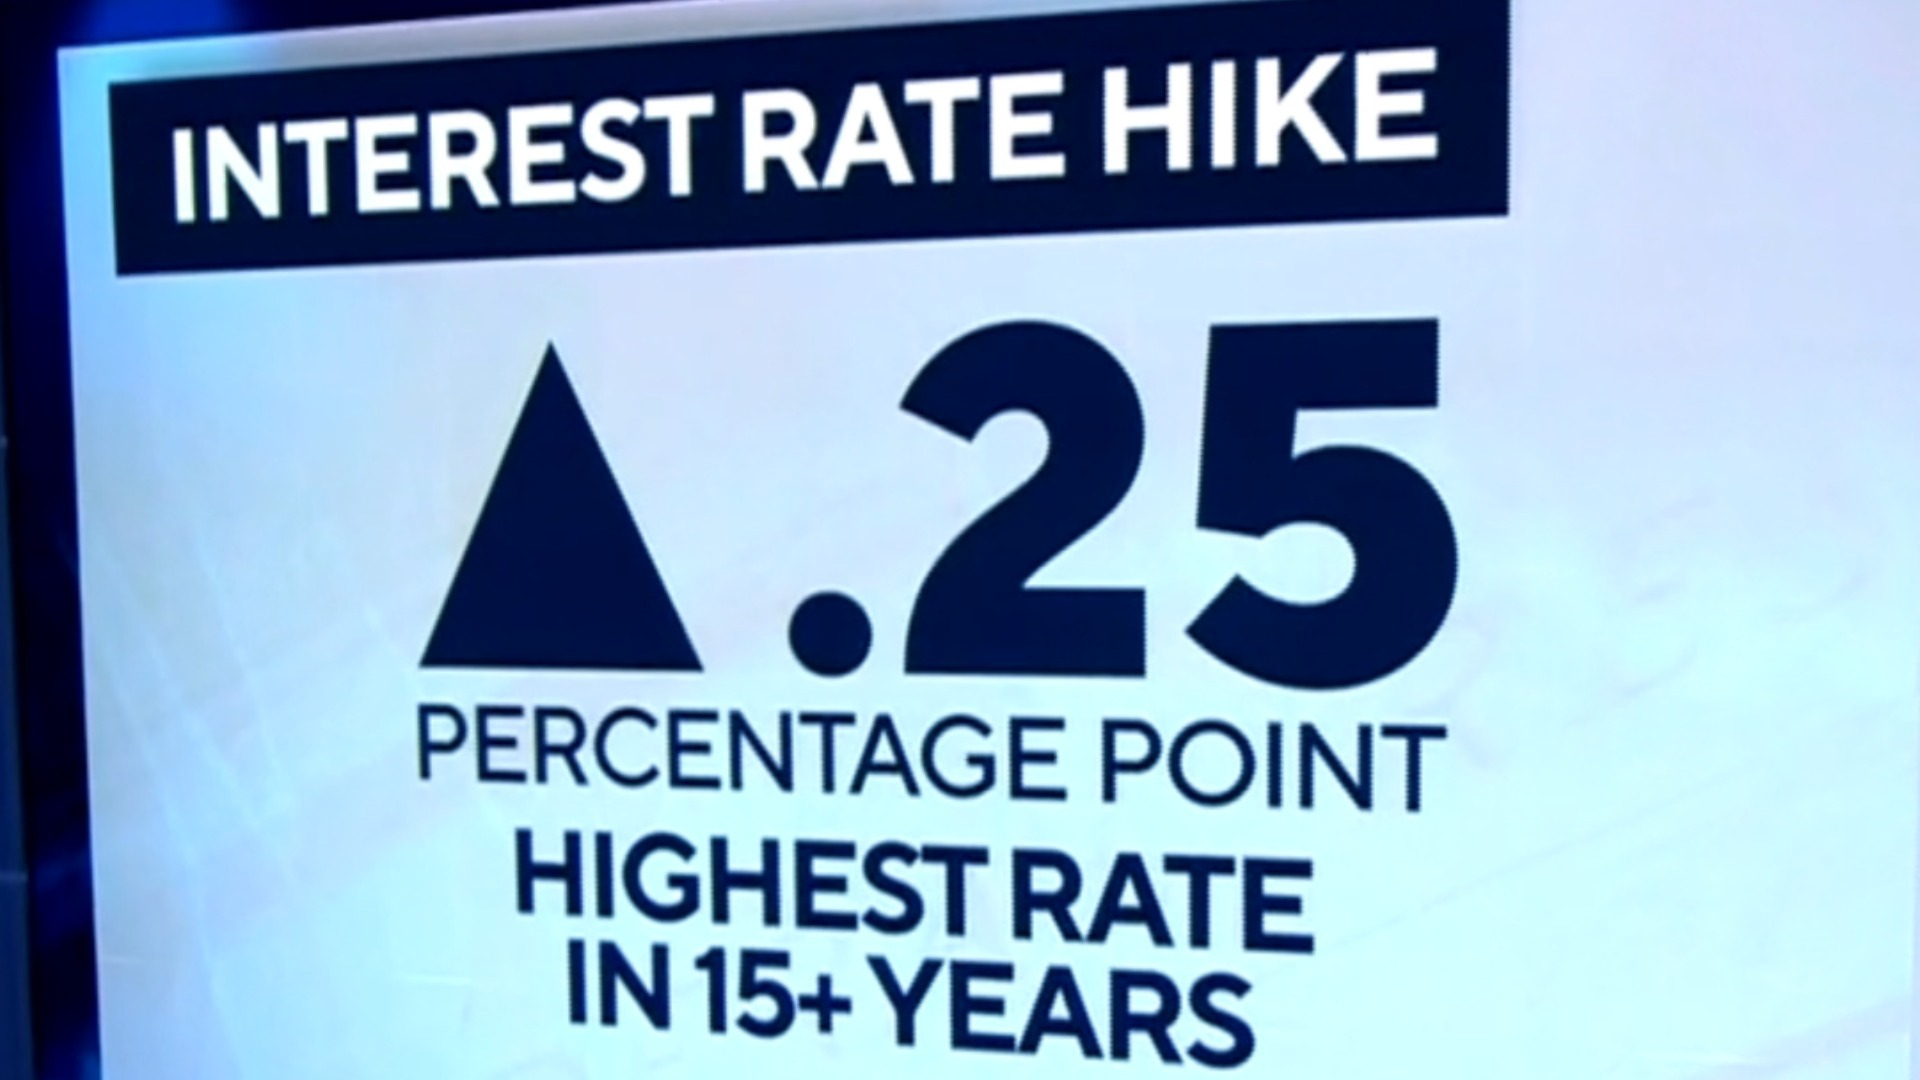 Watch CBS Evening News Fed hikes interest rates by a quarterpoint